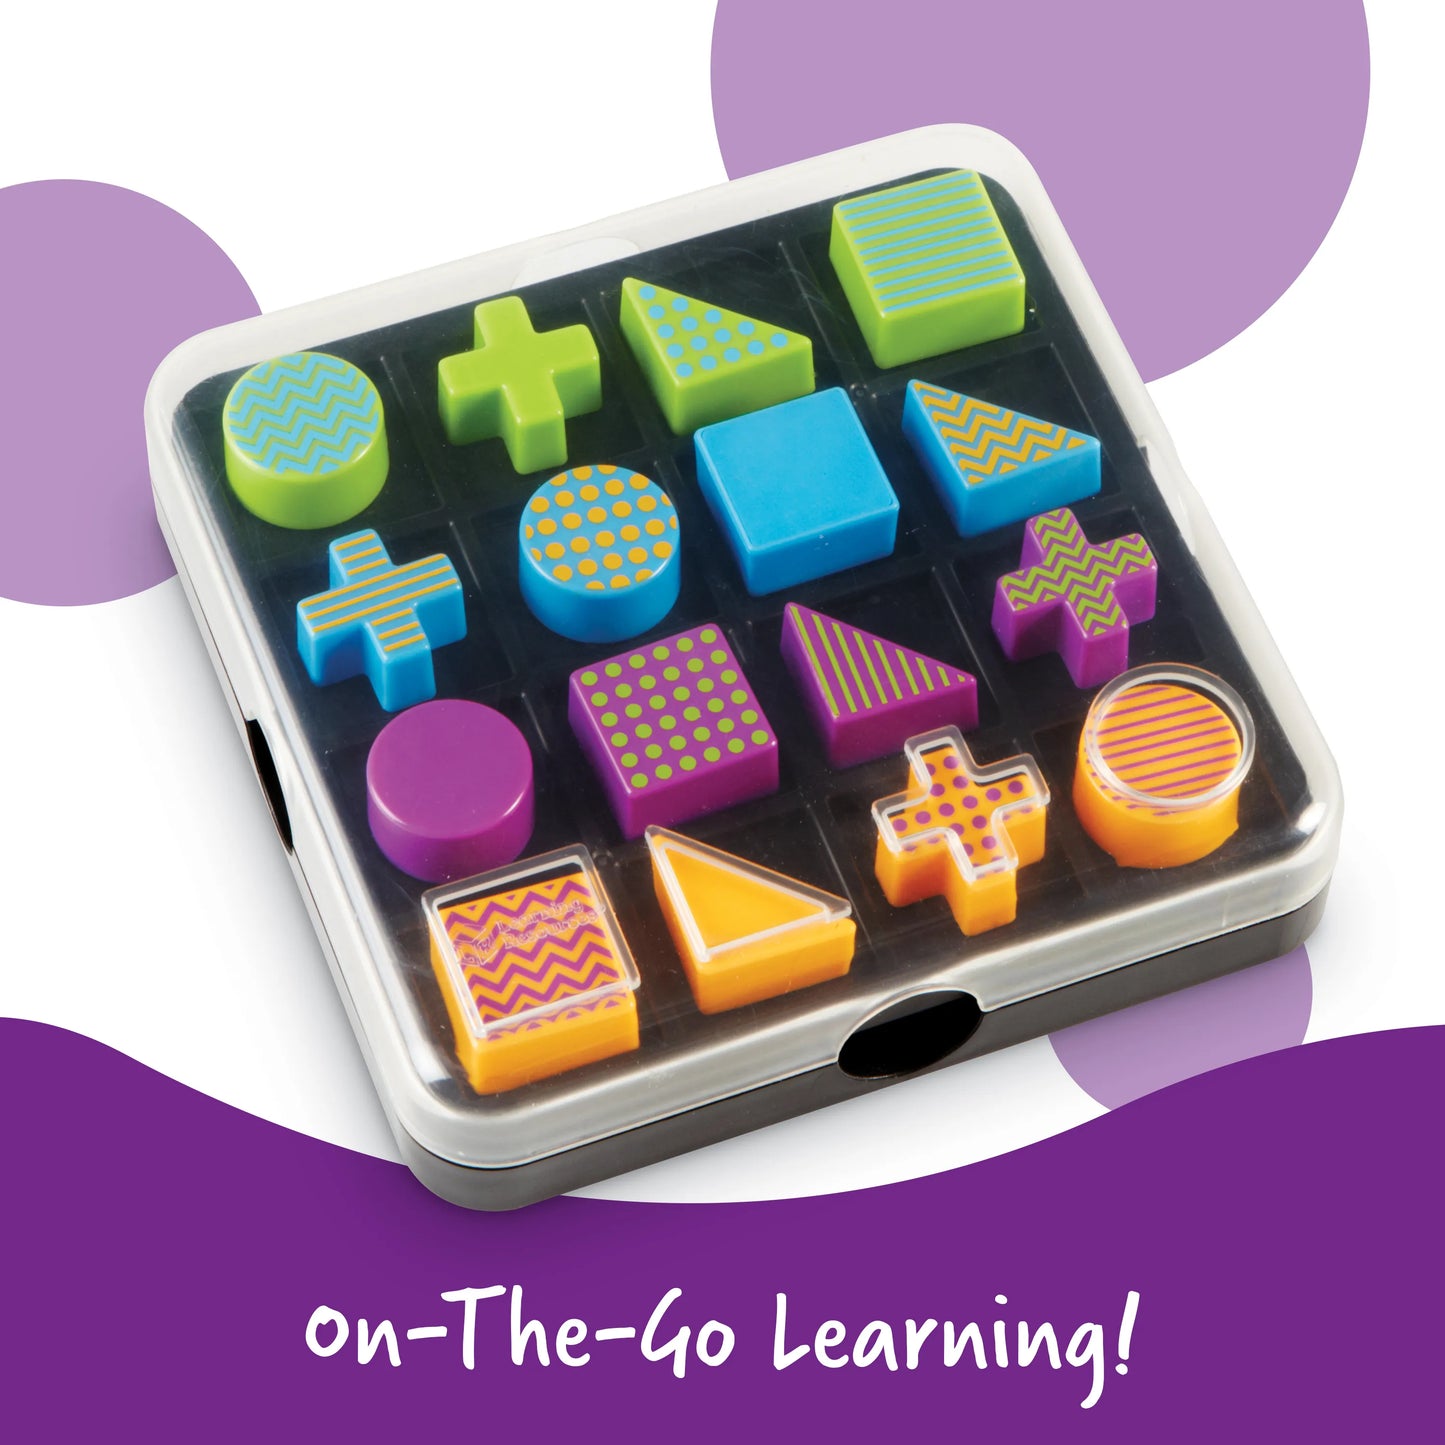 Learning Resources Mental Blox Go!